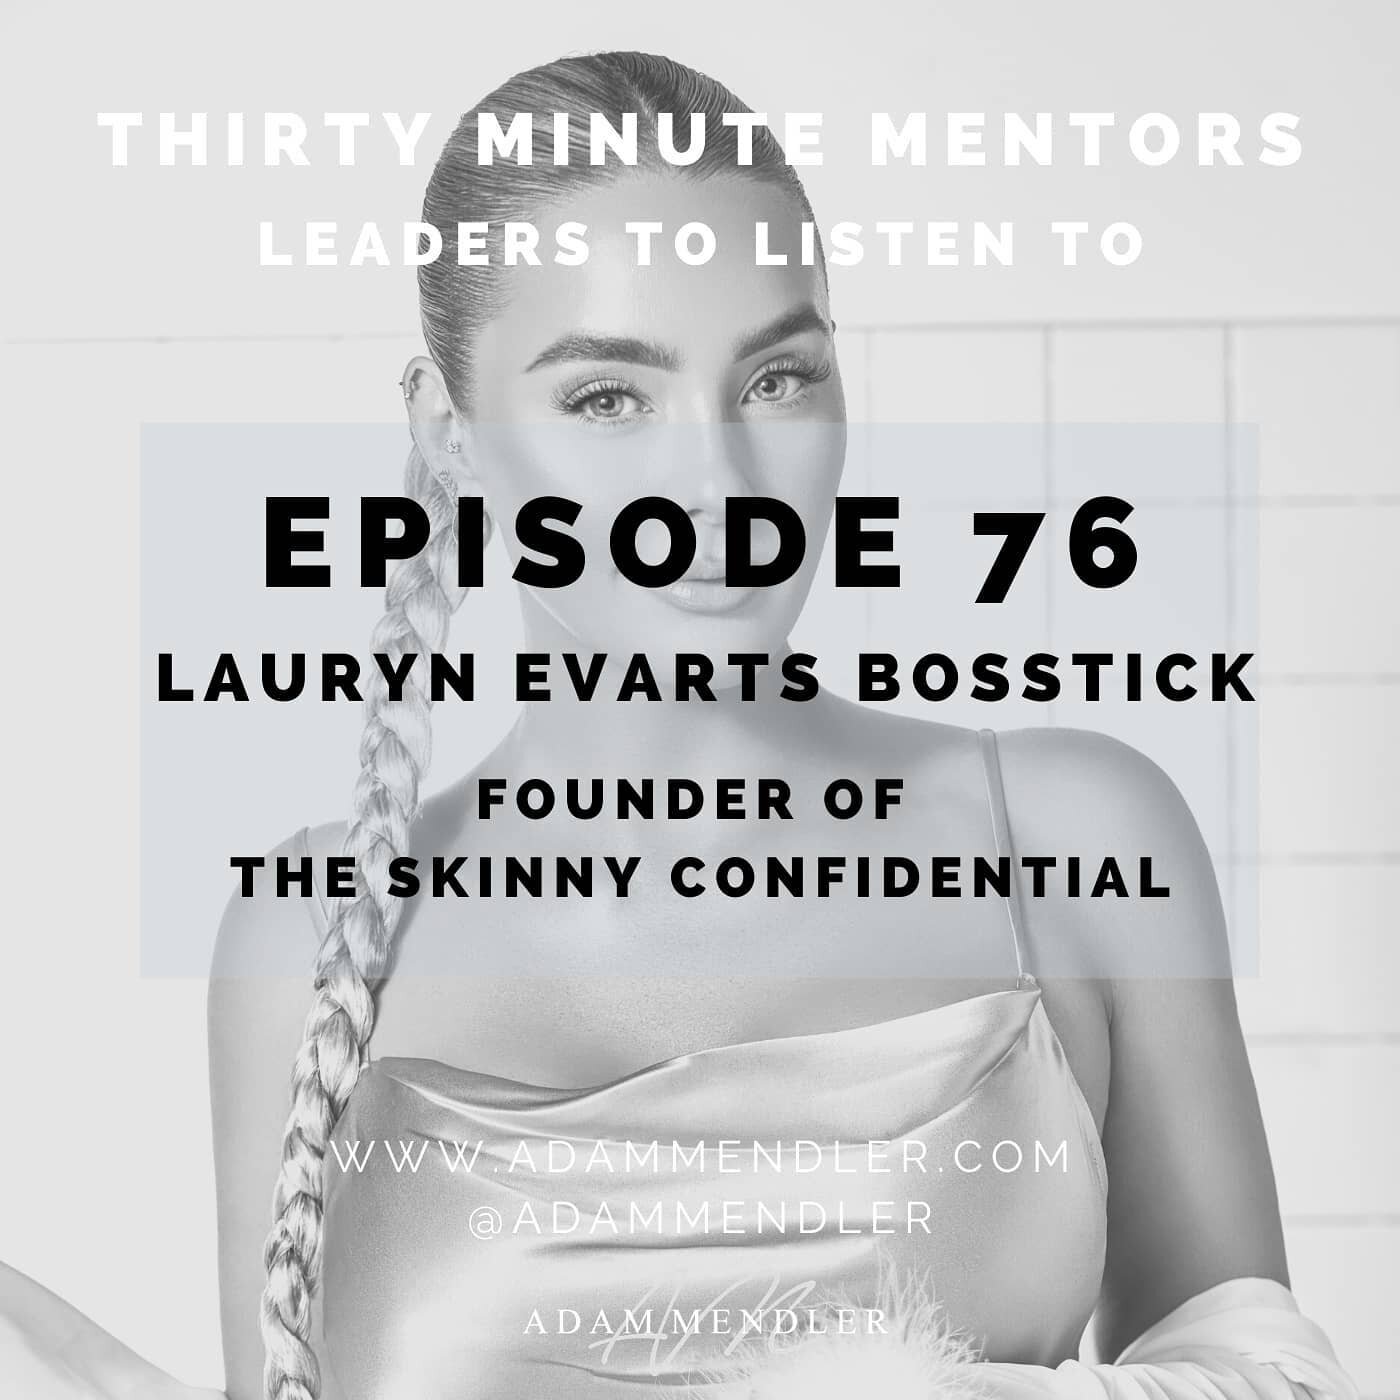 The founder of @theskinnyconfidential - a community consisting of millions of people - @laurynbosstick joined me on Episode 76 of Thirty Minute Mentors to share her journey and best advice on a wide range of subjects. We discussed entrepreneurial les